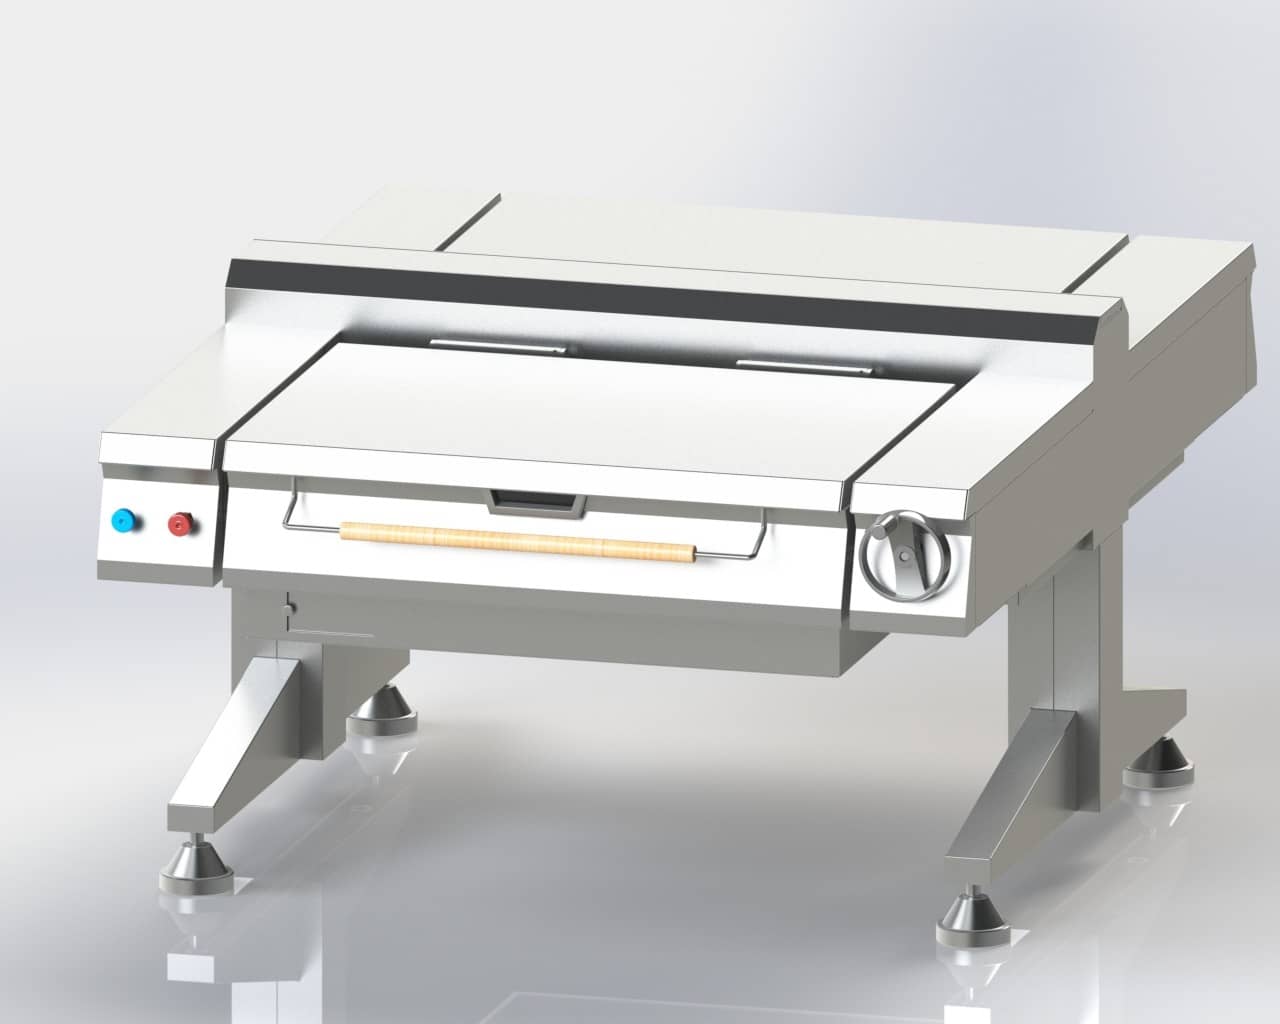 Tilting Pan Twin Unit for boiling and cooking food in bulk